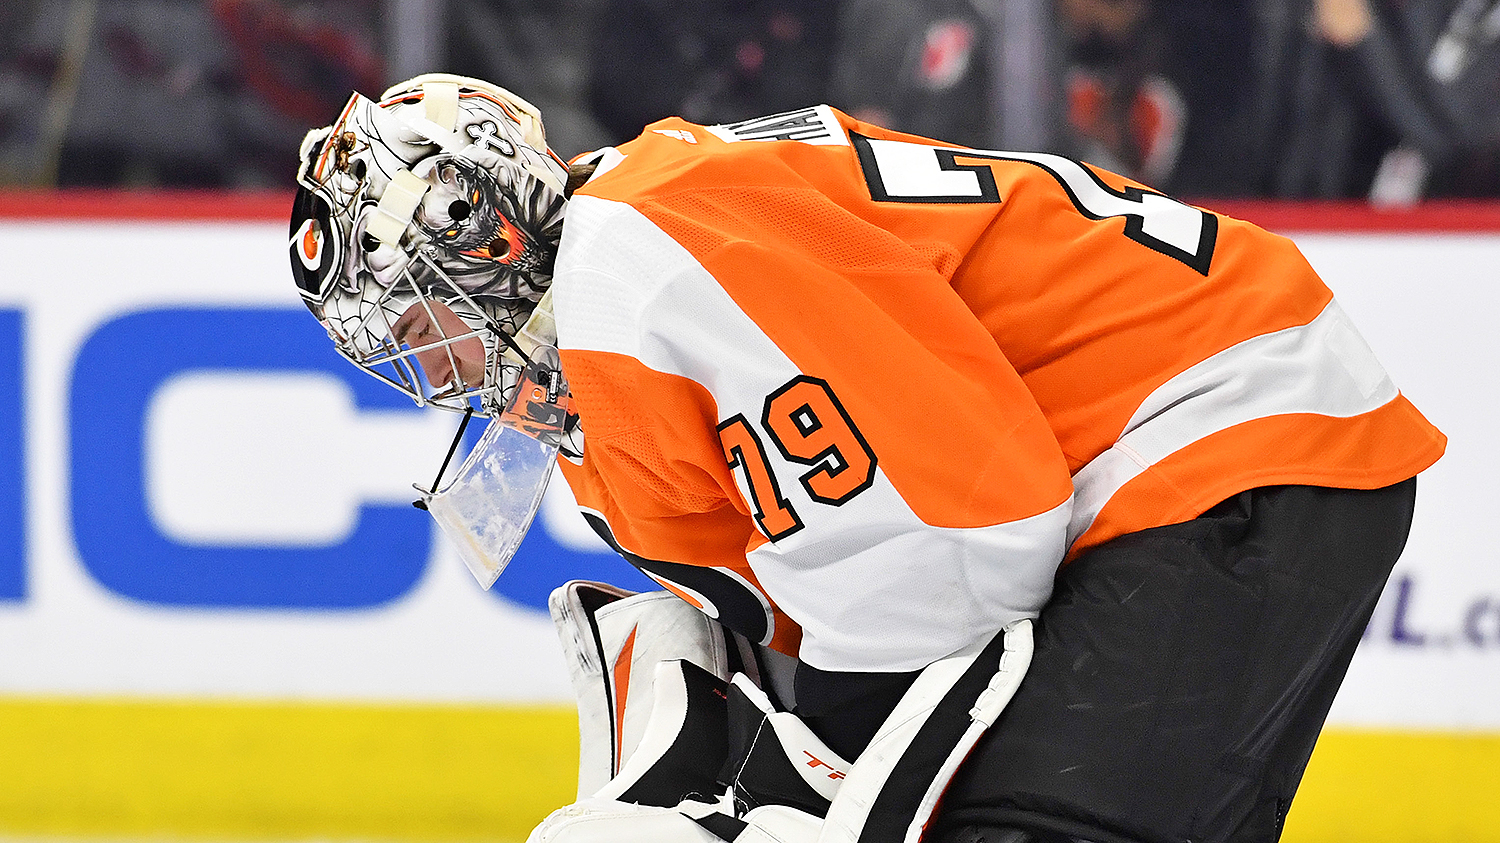 Carter Hart has a hamstring injury and misses the game Flyers-Capitals